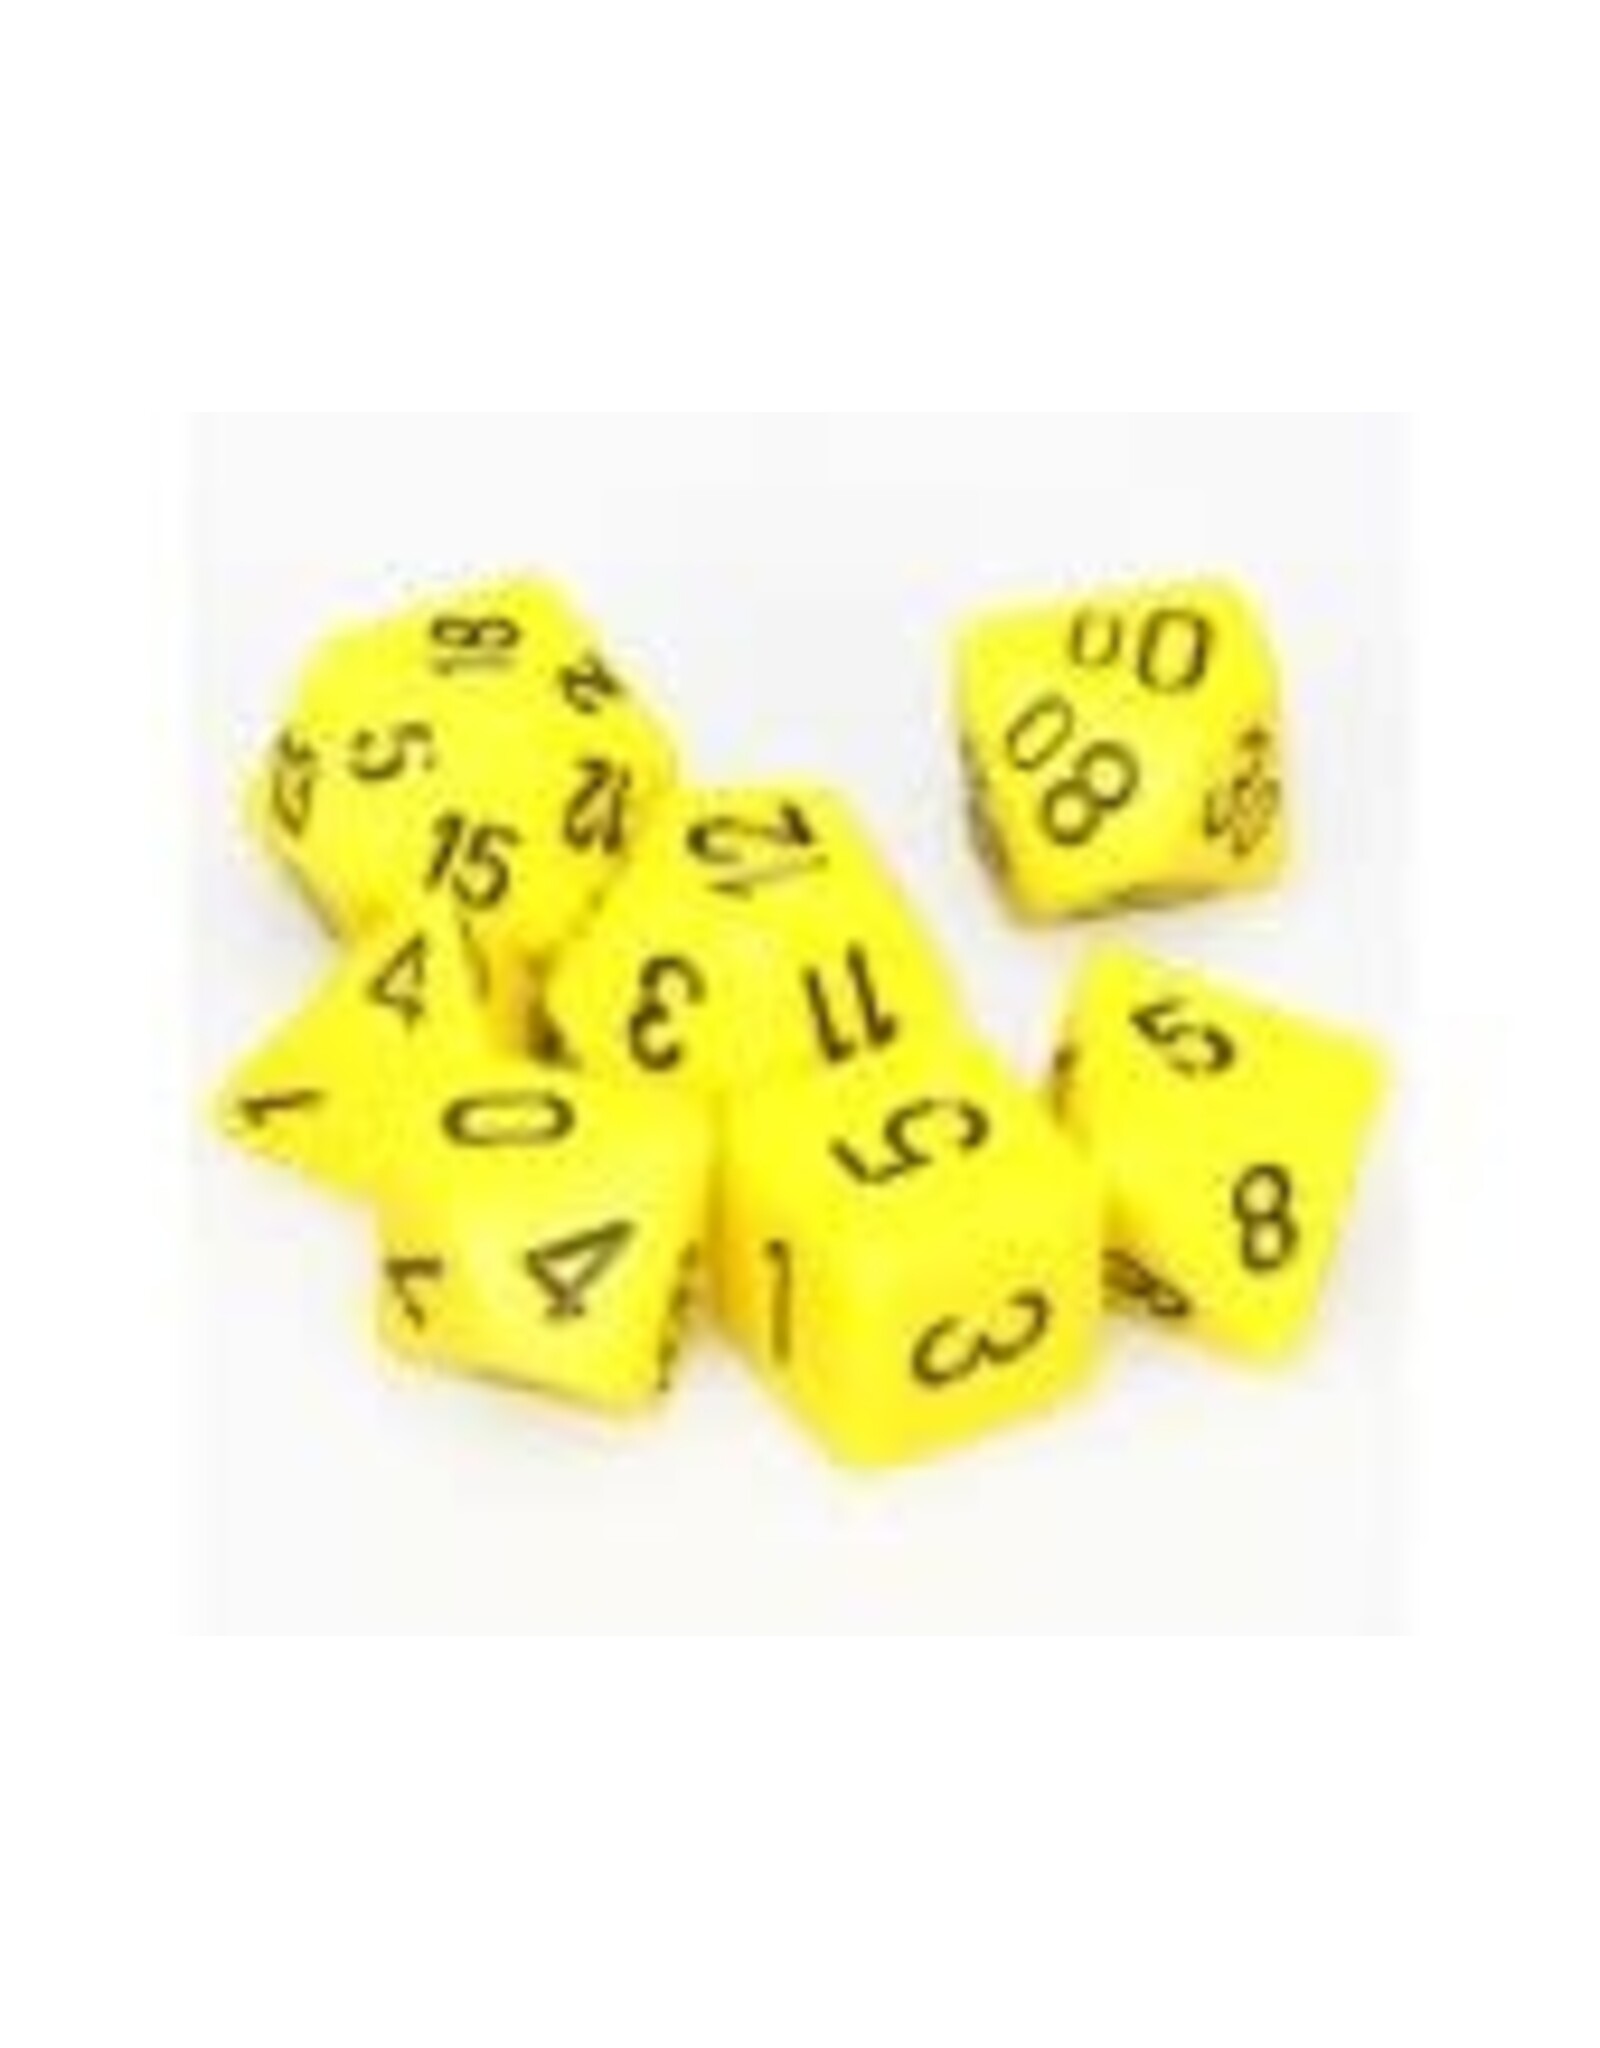 Chessex Yellow w/black Opaque Poly 7 dice set